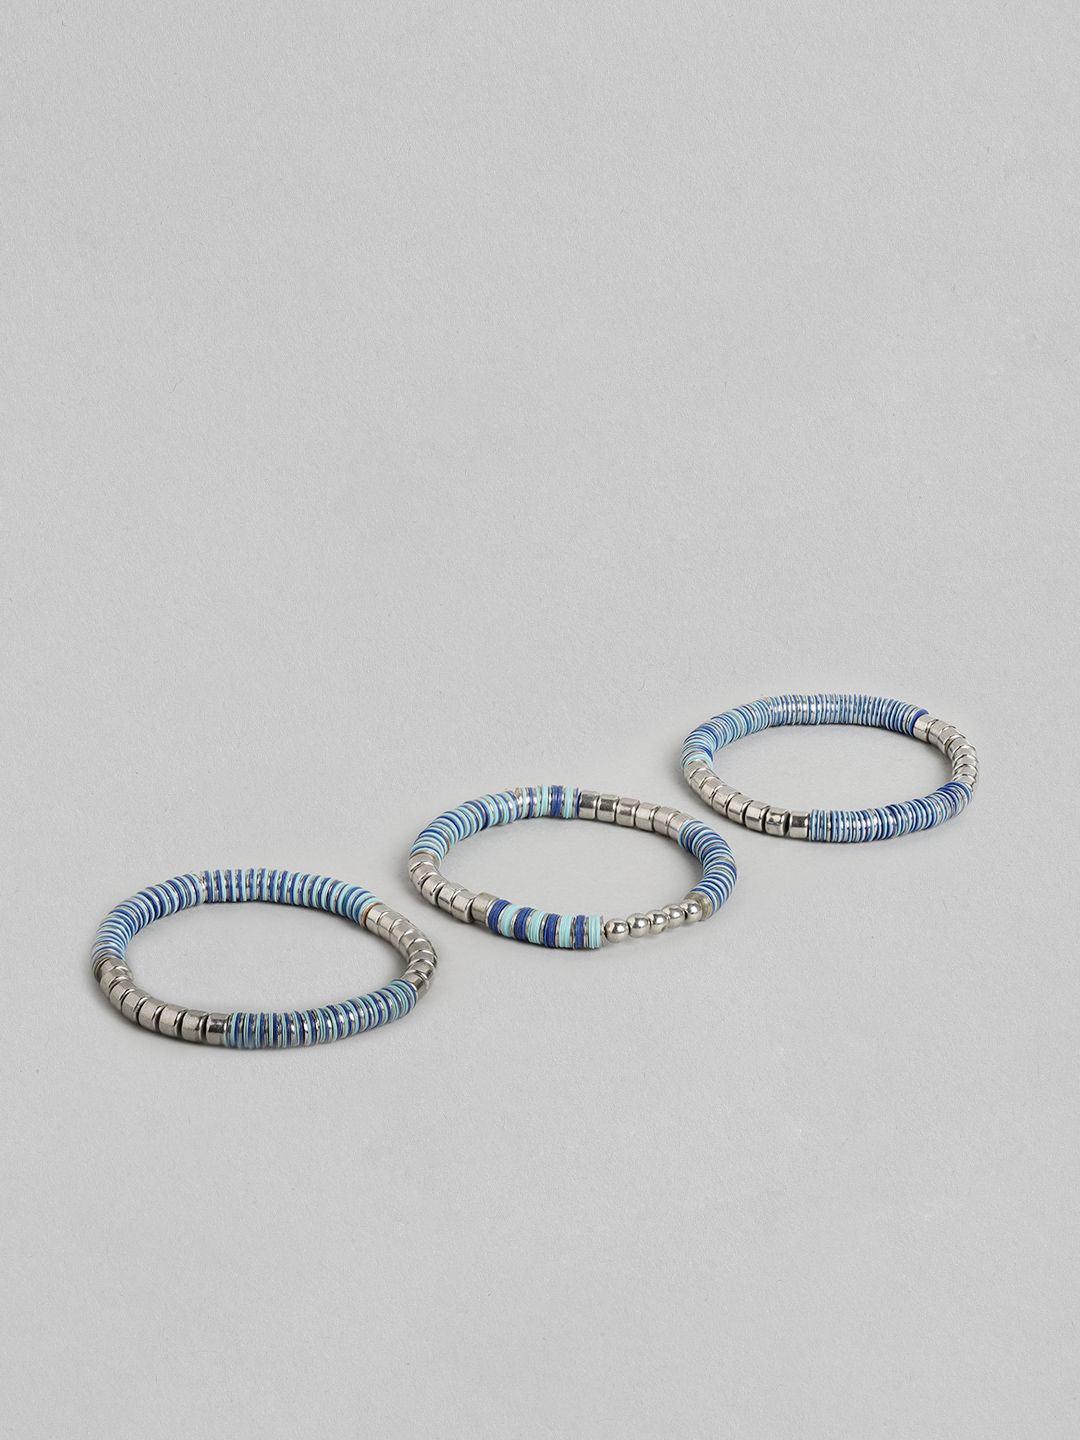 RICHEERA Women Set of 3 Blue & Silver-Toned Silver-Plated Elasticated Bracelet Price in India